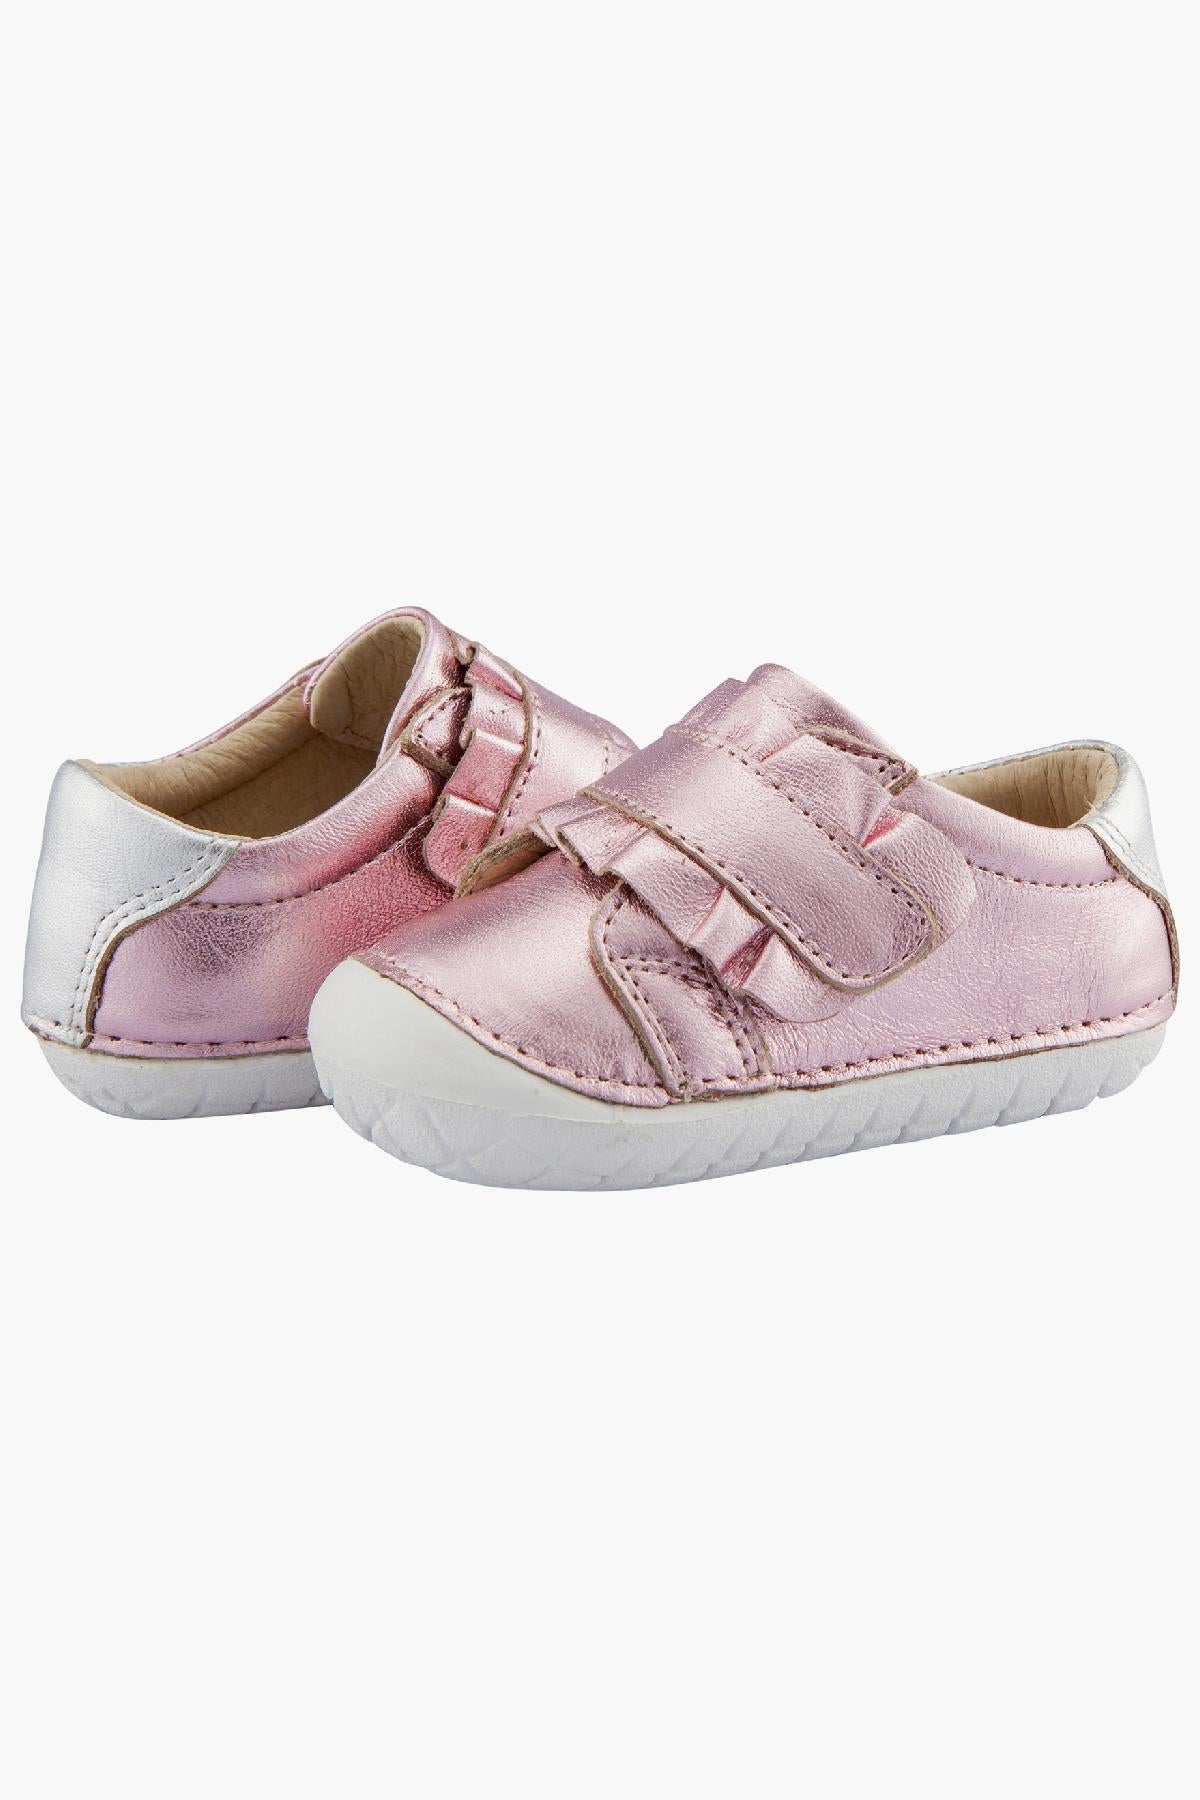 Old Soles Frill Pave Toddler Shoes 